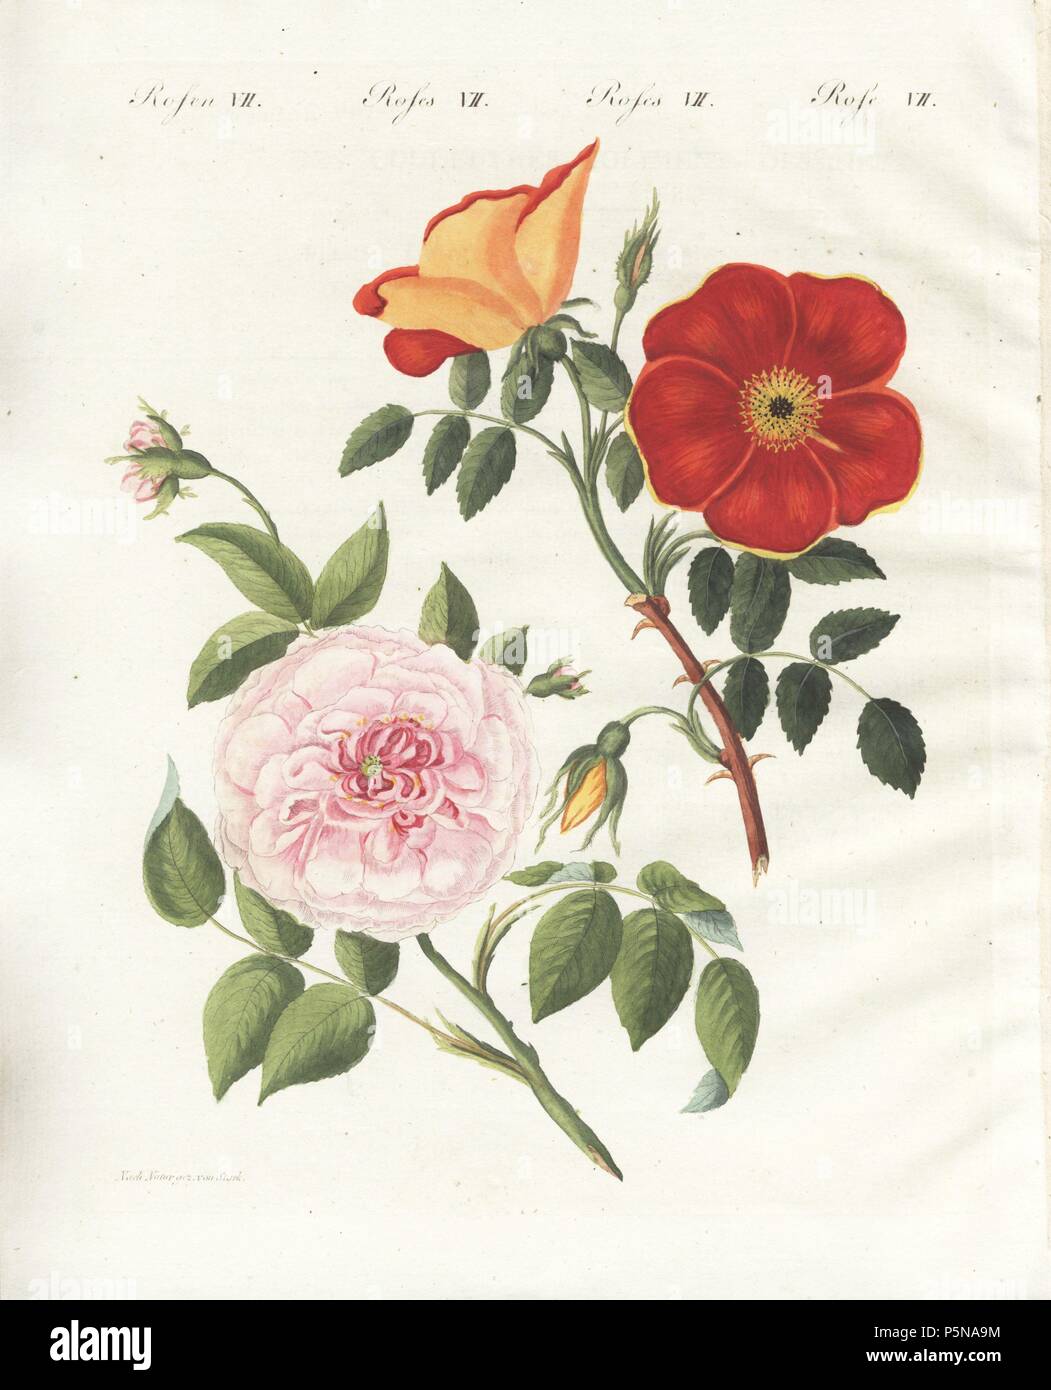 Austrian copper rose, Rosa punicea, and white virgin rose, Rosa truncata virginalis. Handcoloured copperplate engraving from an illustration drawn from nature by Stark from Bertuch's 'Bilderbuch fur Kinder' (Picture Book for Children), Weimar, 1790-1830. Friedrich Johann Bertuch (1747-1822) was a German publisher and man of arts most famous for his 12-volume encyclopedia for children illustrated with 1,200 engraved plates on natural history, science, costume, mythology, etc. Stock Photo